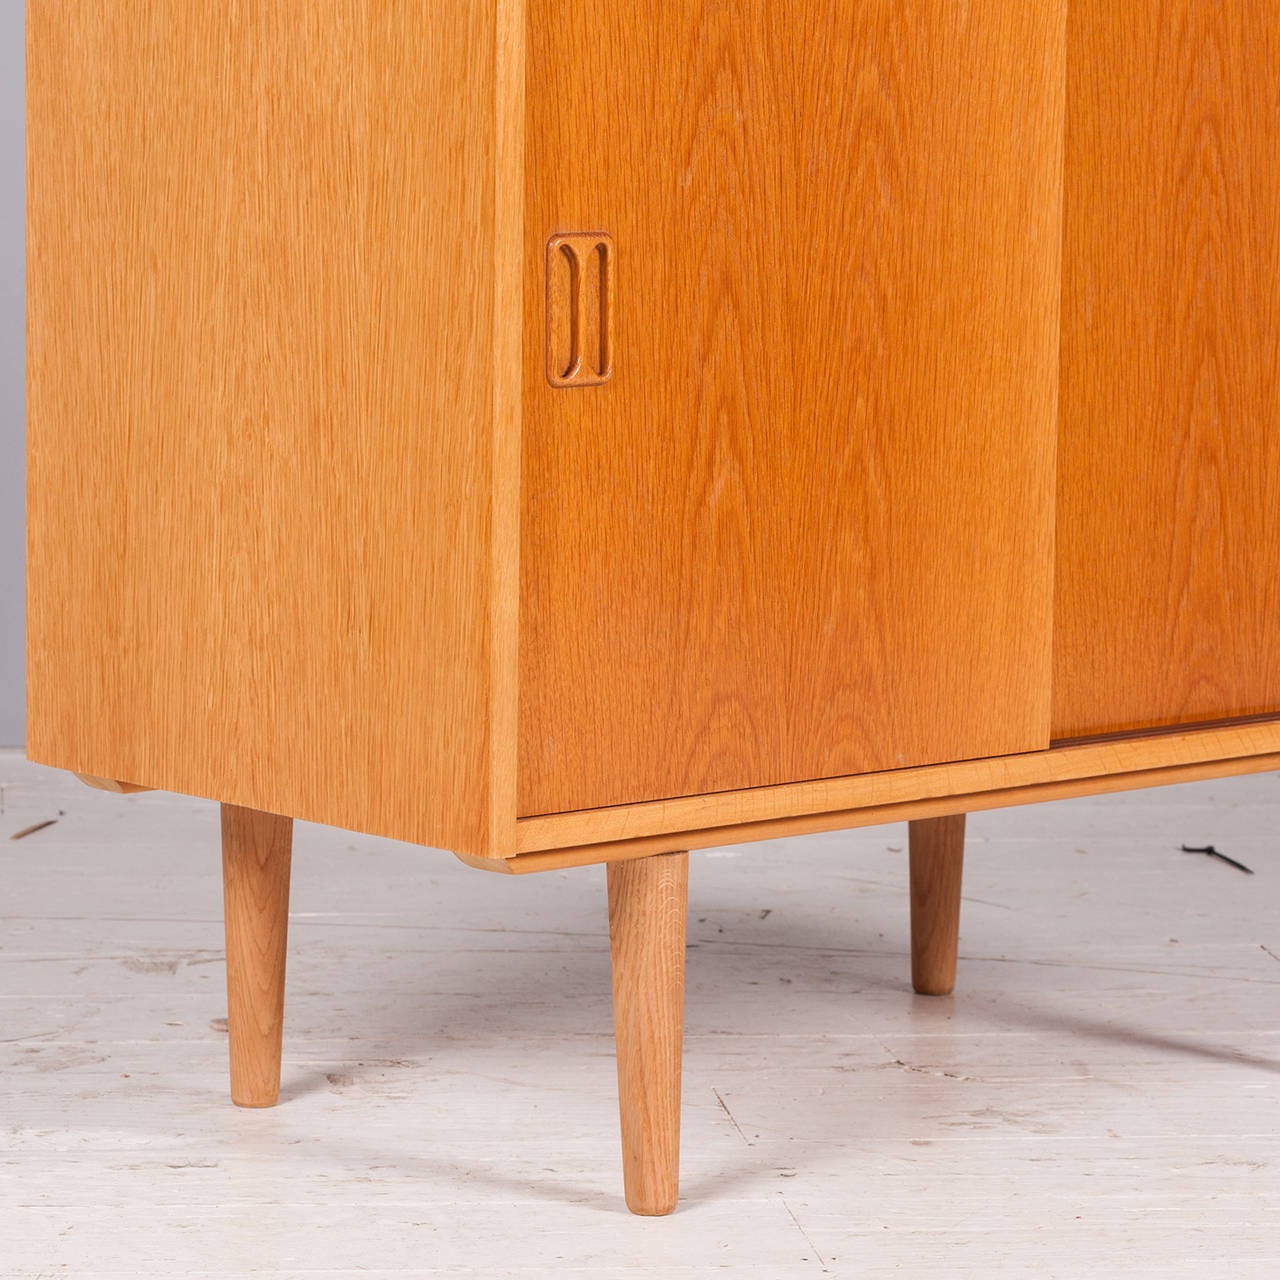 Danish Small Sideboard in Oak, 1970s In Excellent Condition For Sale In Melbourne, Victoria